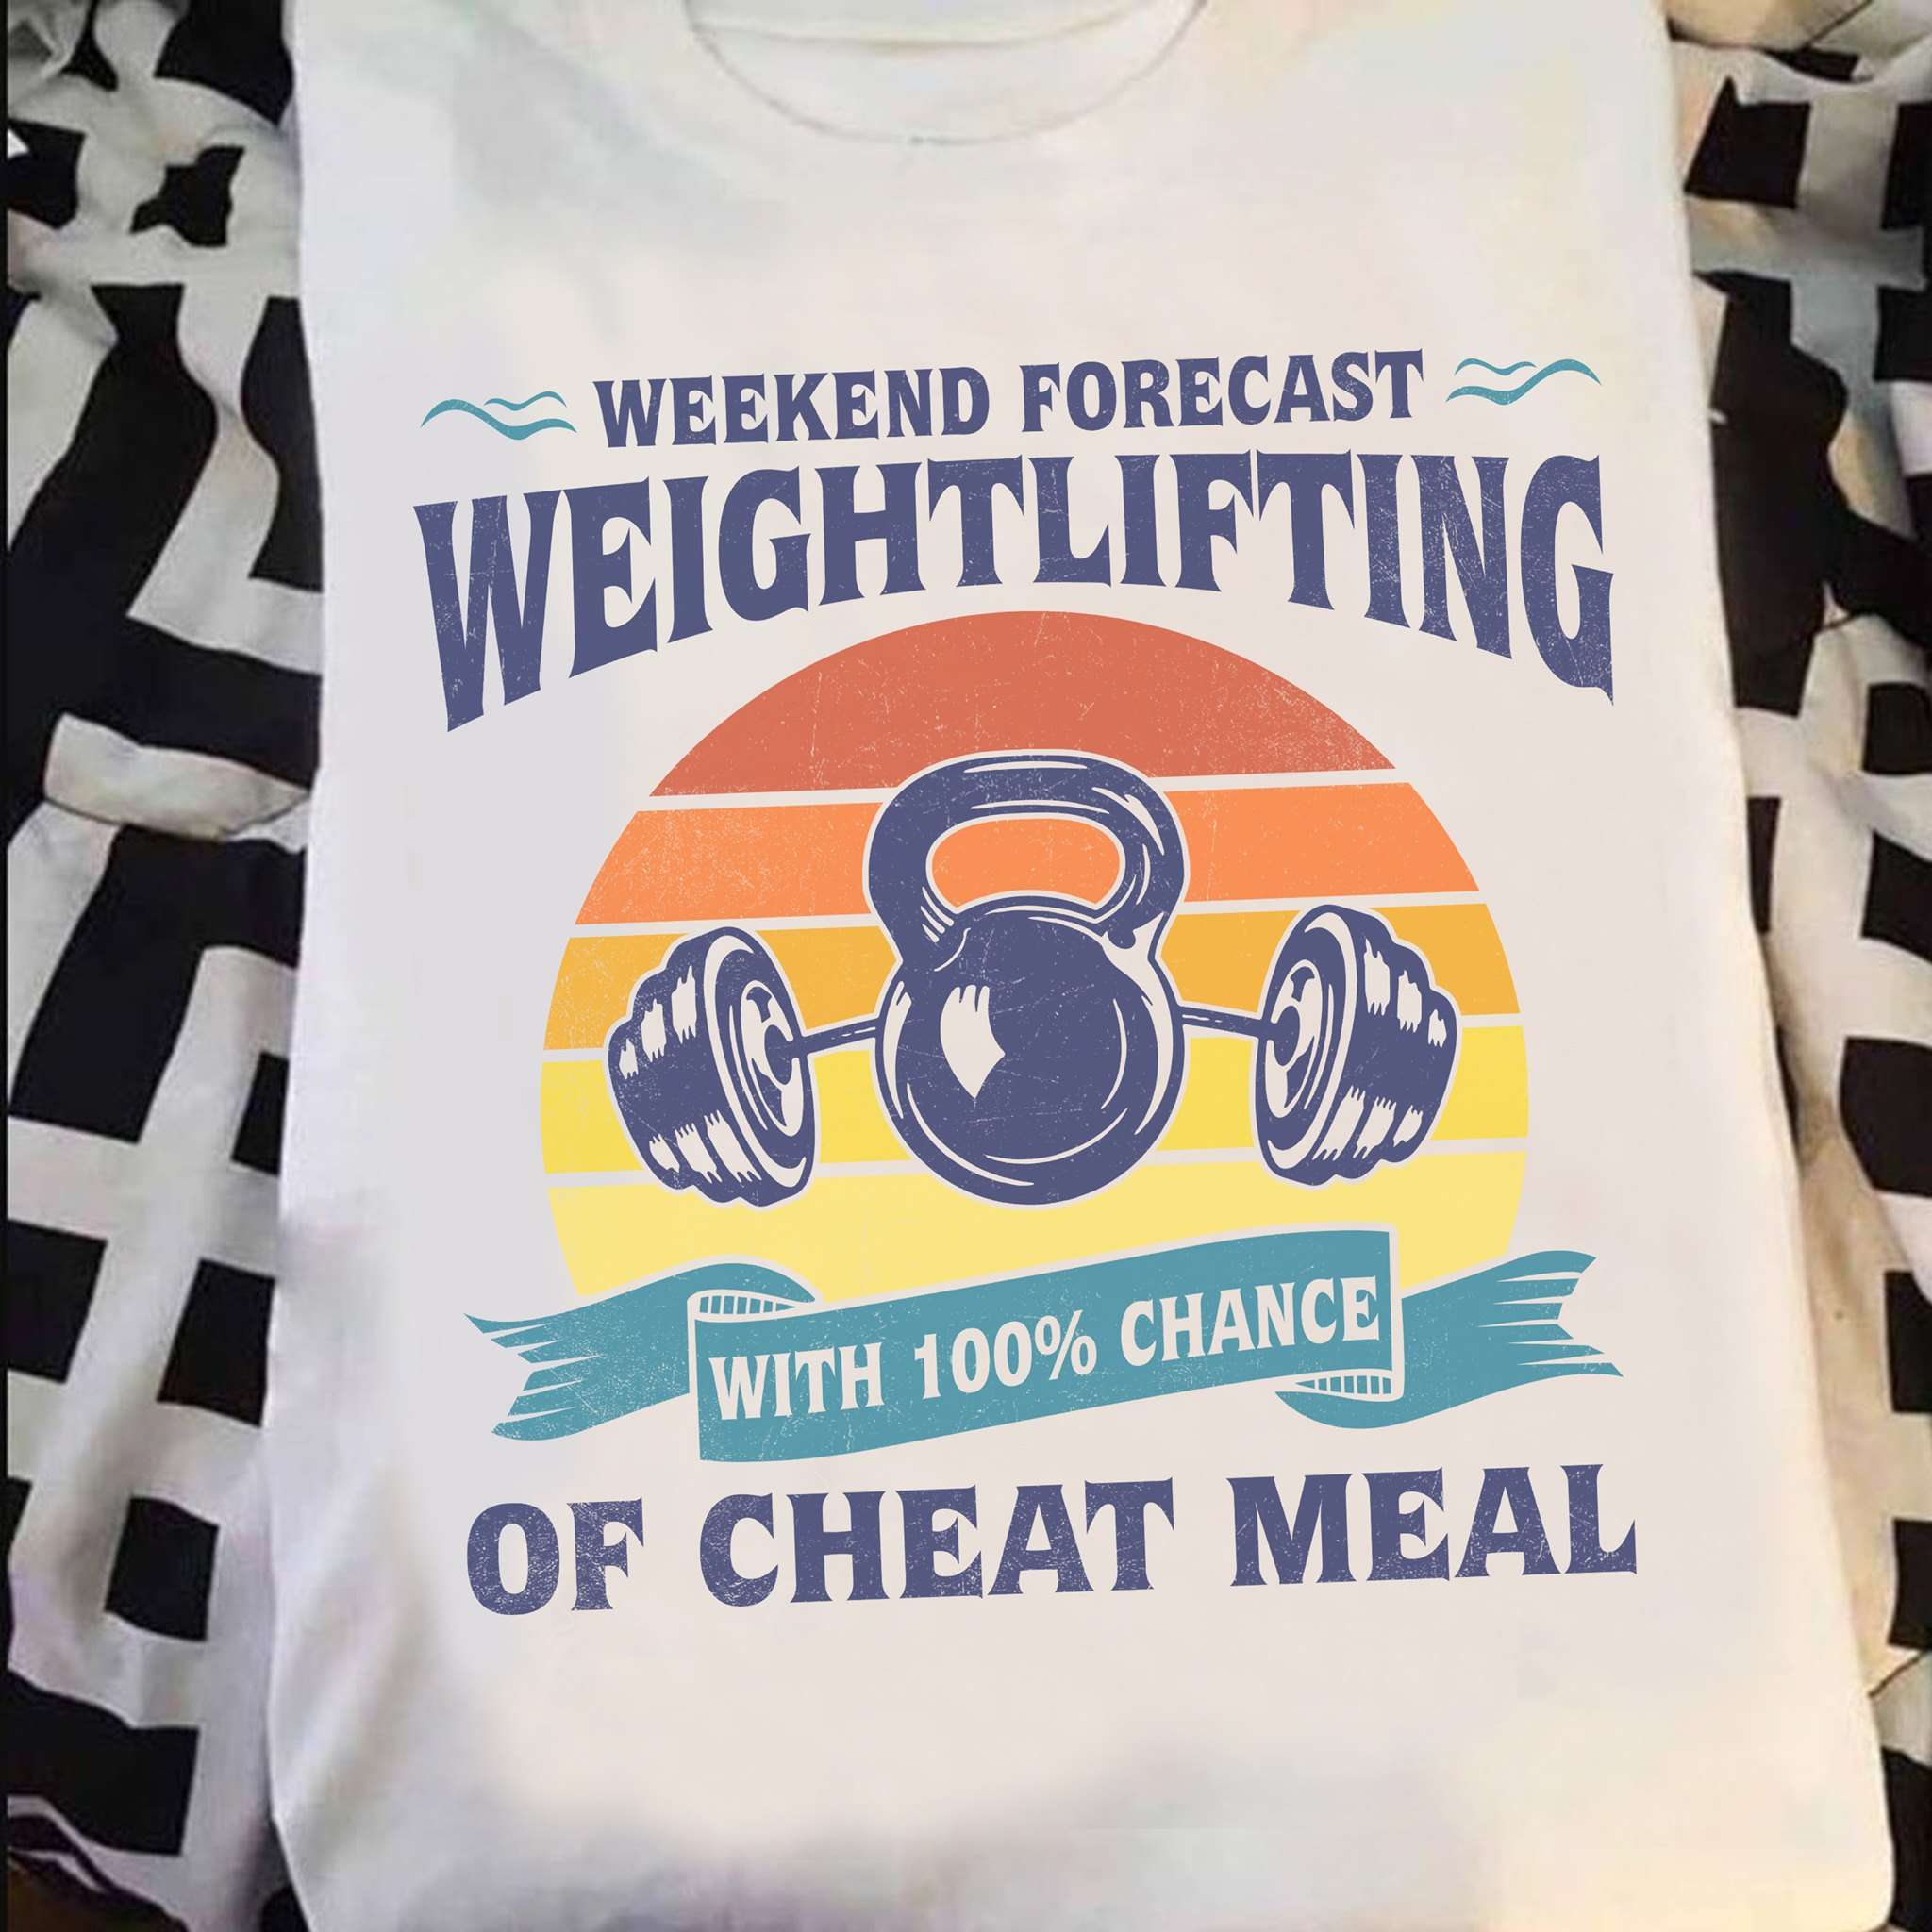 Gym Equipment - Weekend forecast weightlighting with 100% chance of cheat meal